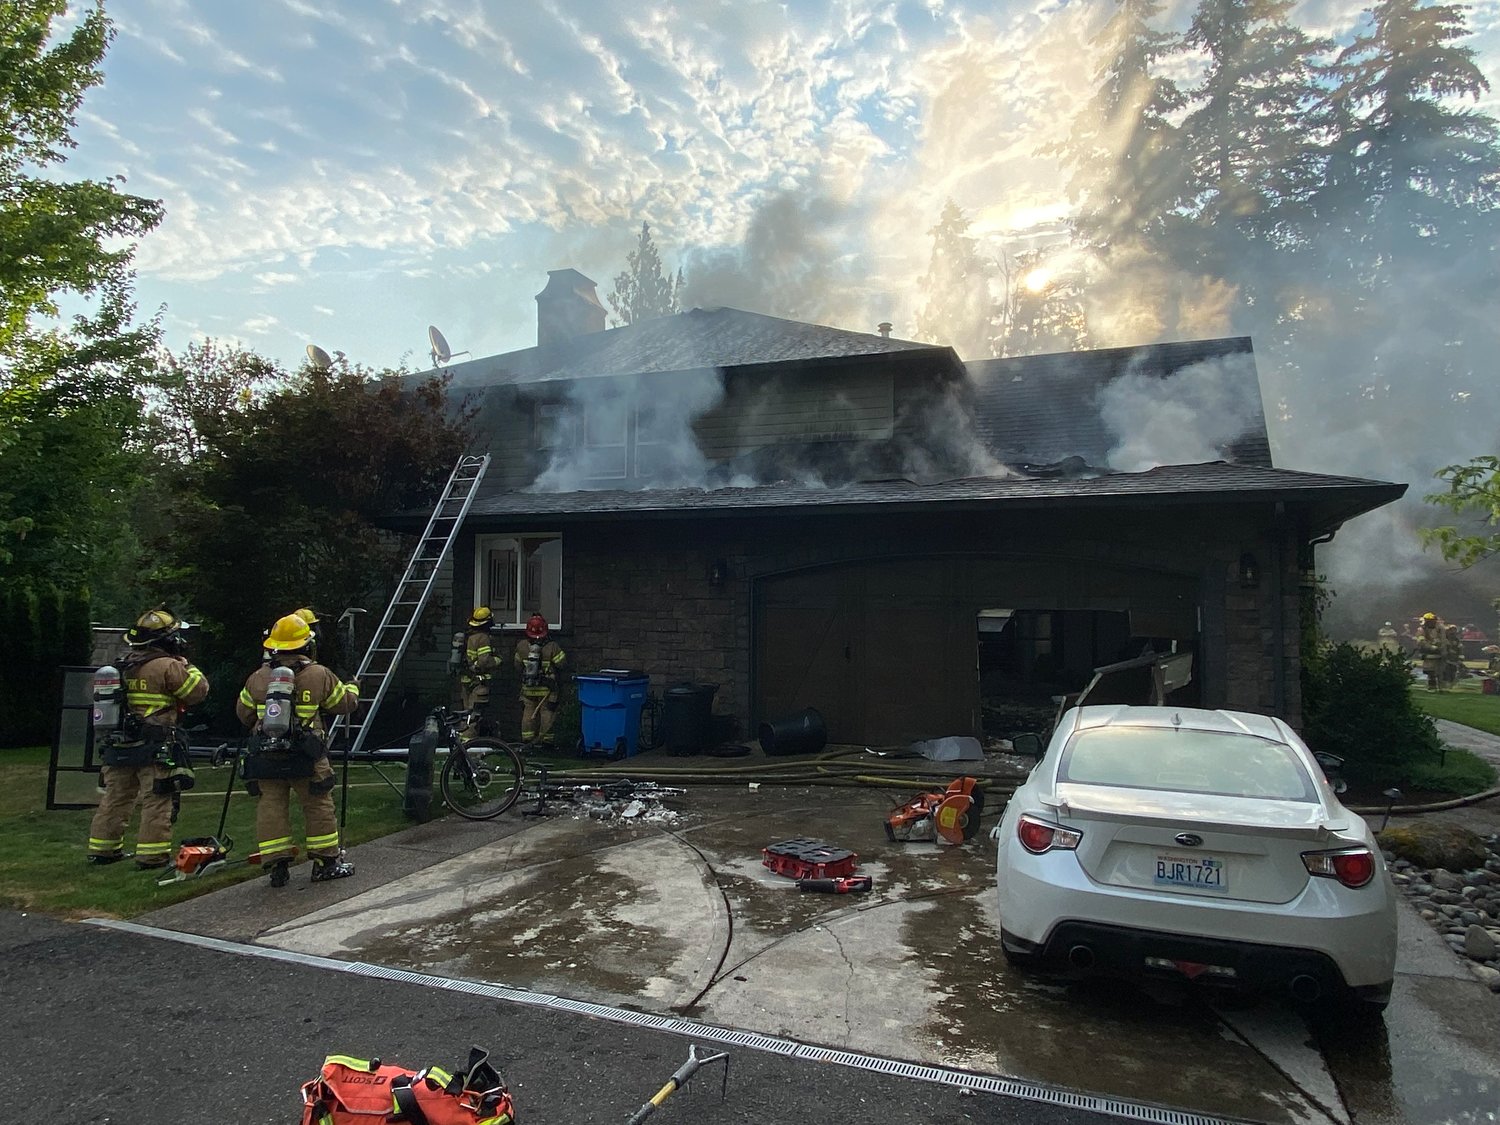 Firefighters work to extinguish a structure fire at a home in the 1400 block of Northwest 304th Circle in Ridgefield on Aug. 1. 